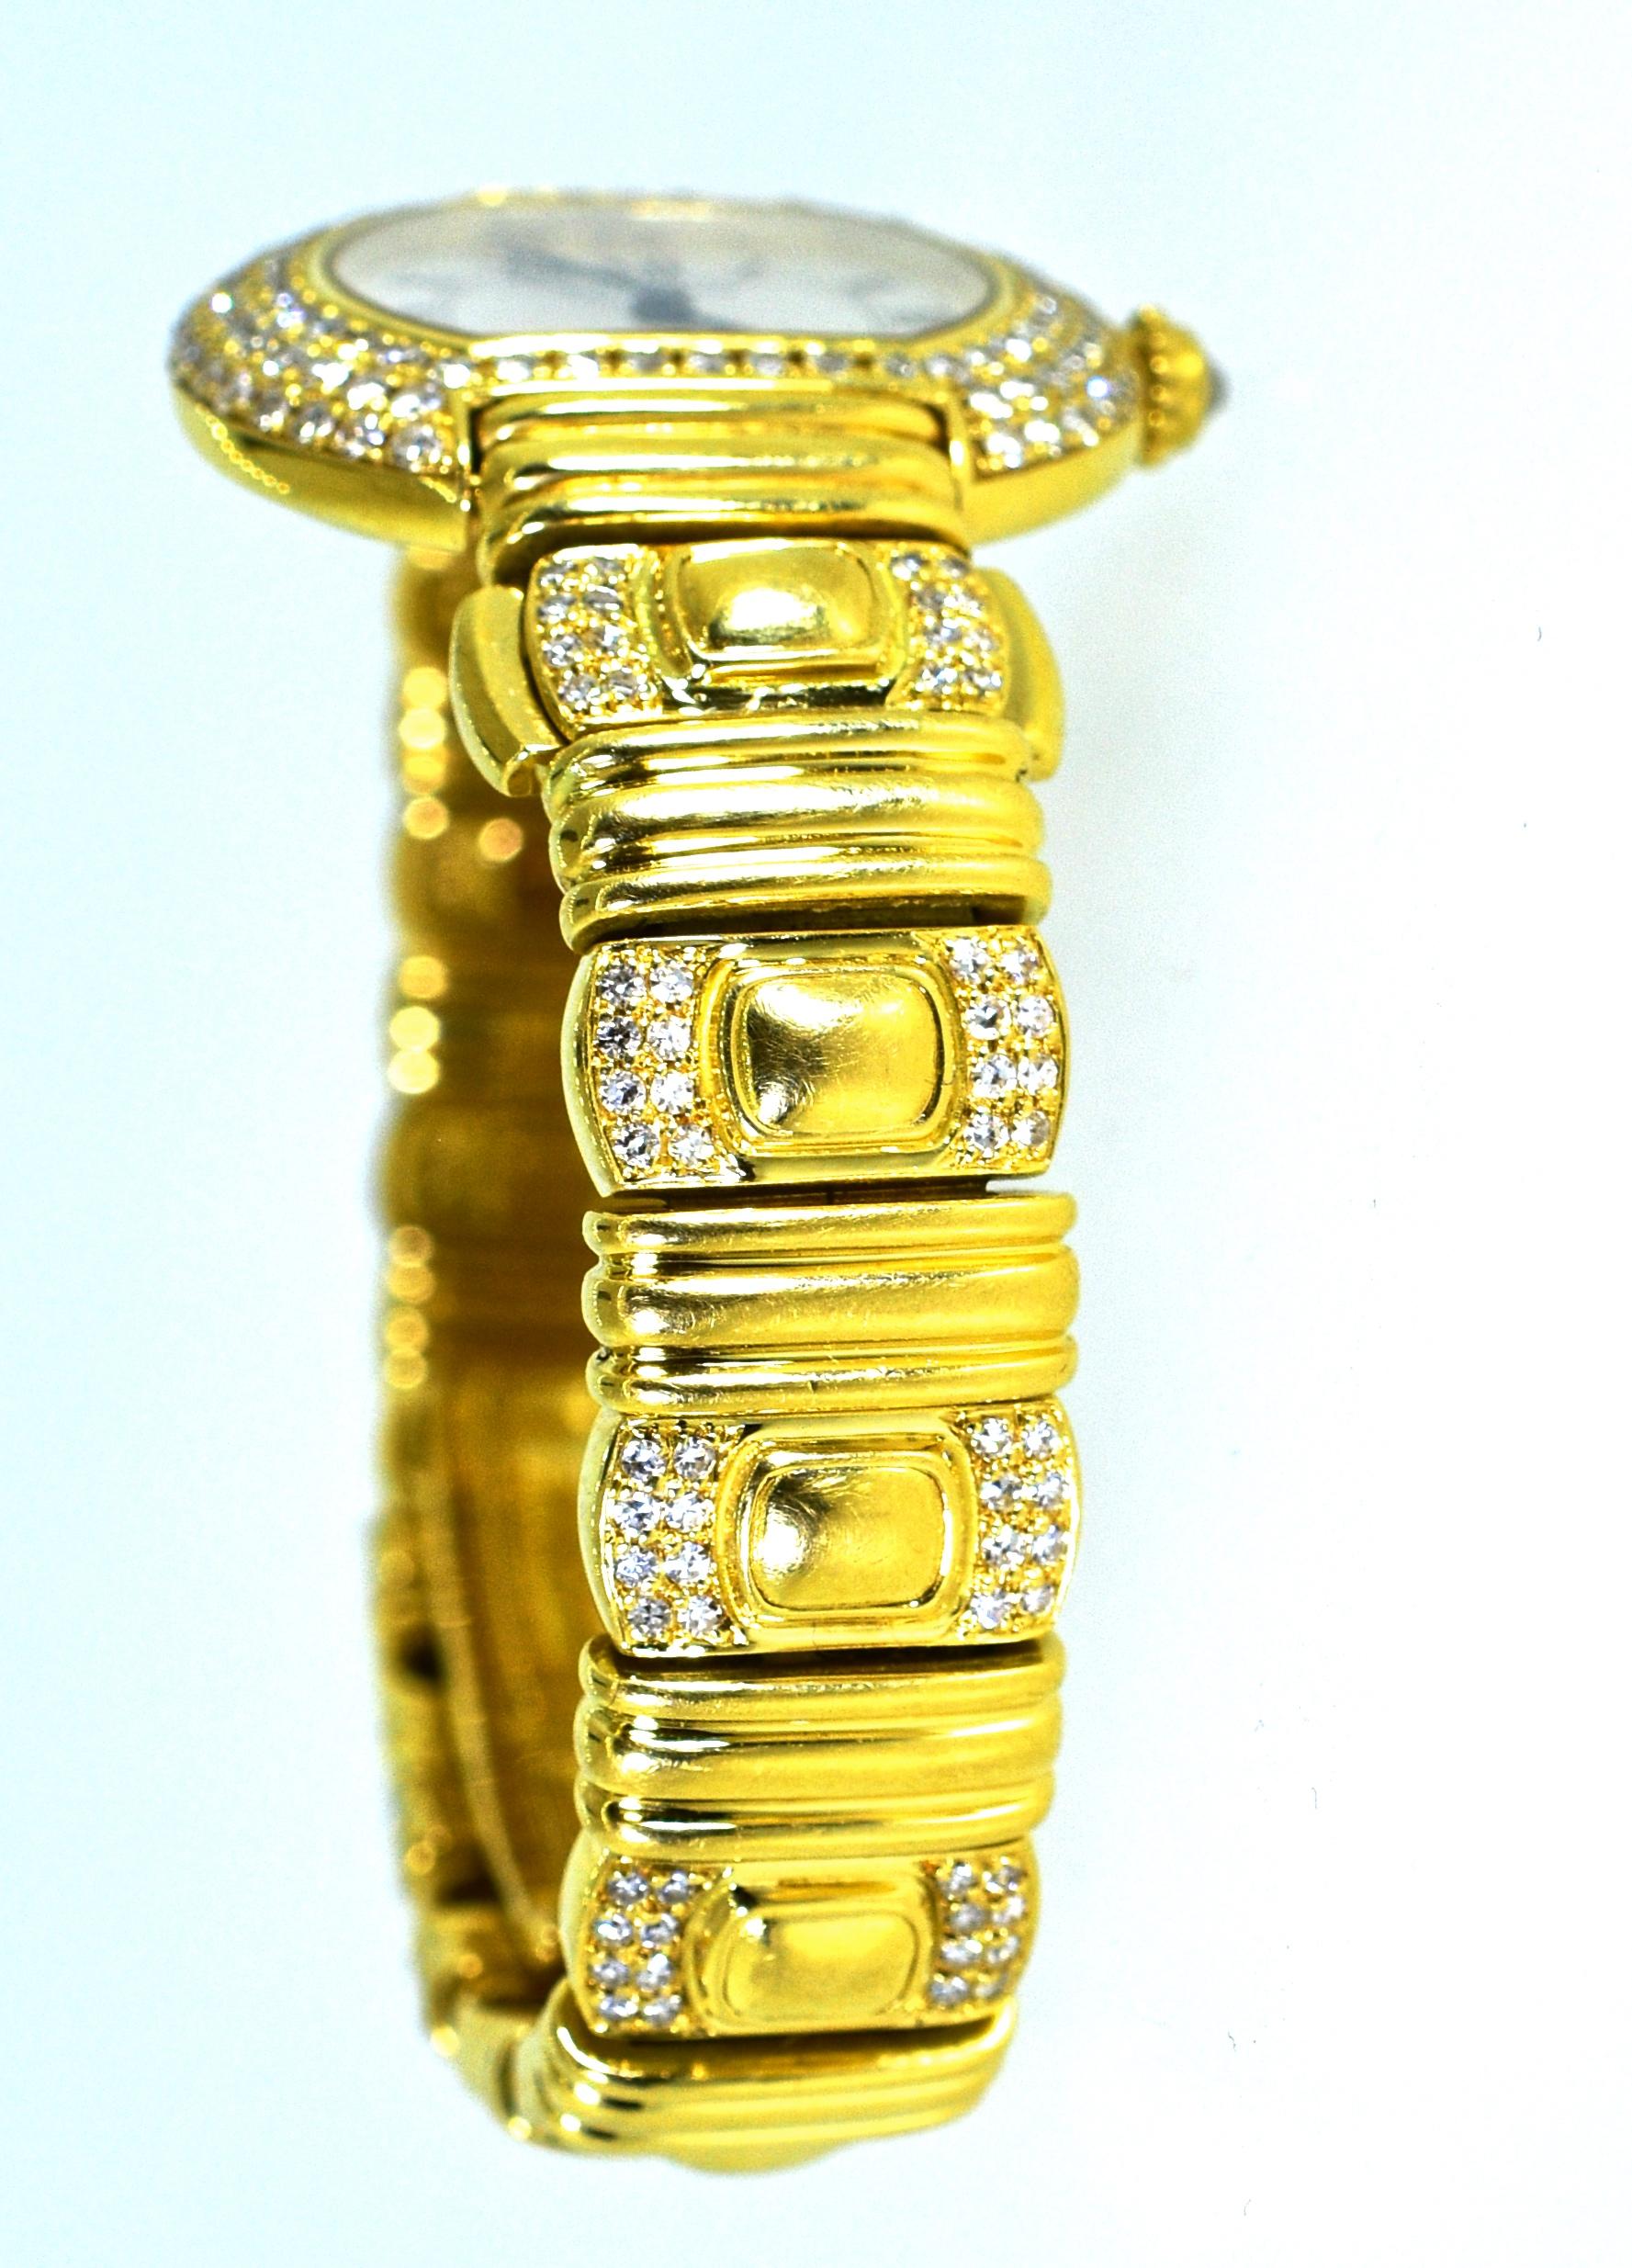 Cartier wristwatch or bracelet in 18K yellow gold with diamonds throughout, this watch bracelet can be worn with and without the watch.  Simply take out the watch and then put in the matching gold section and wear this piece just as a gold bracelet.